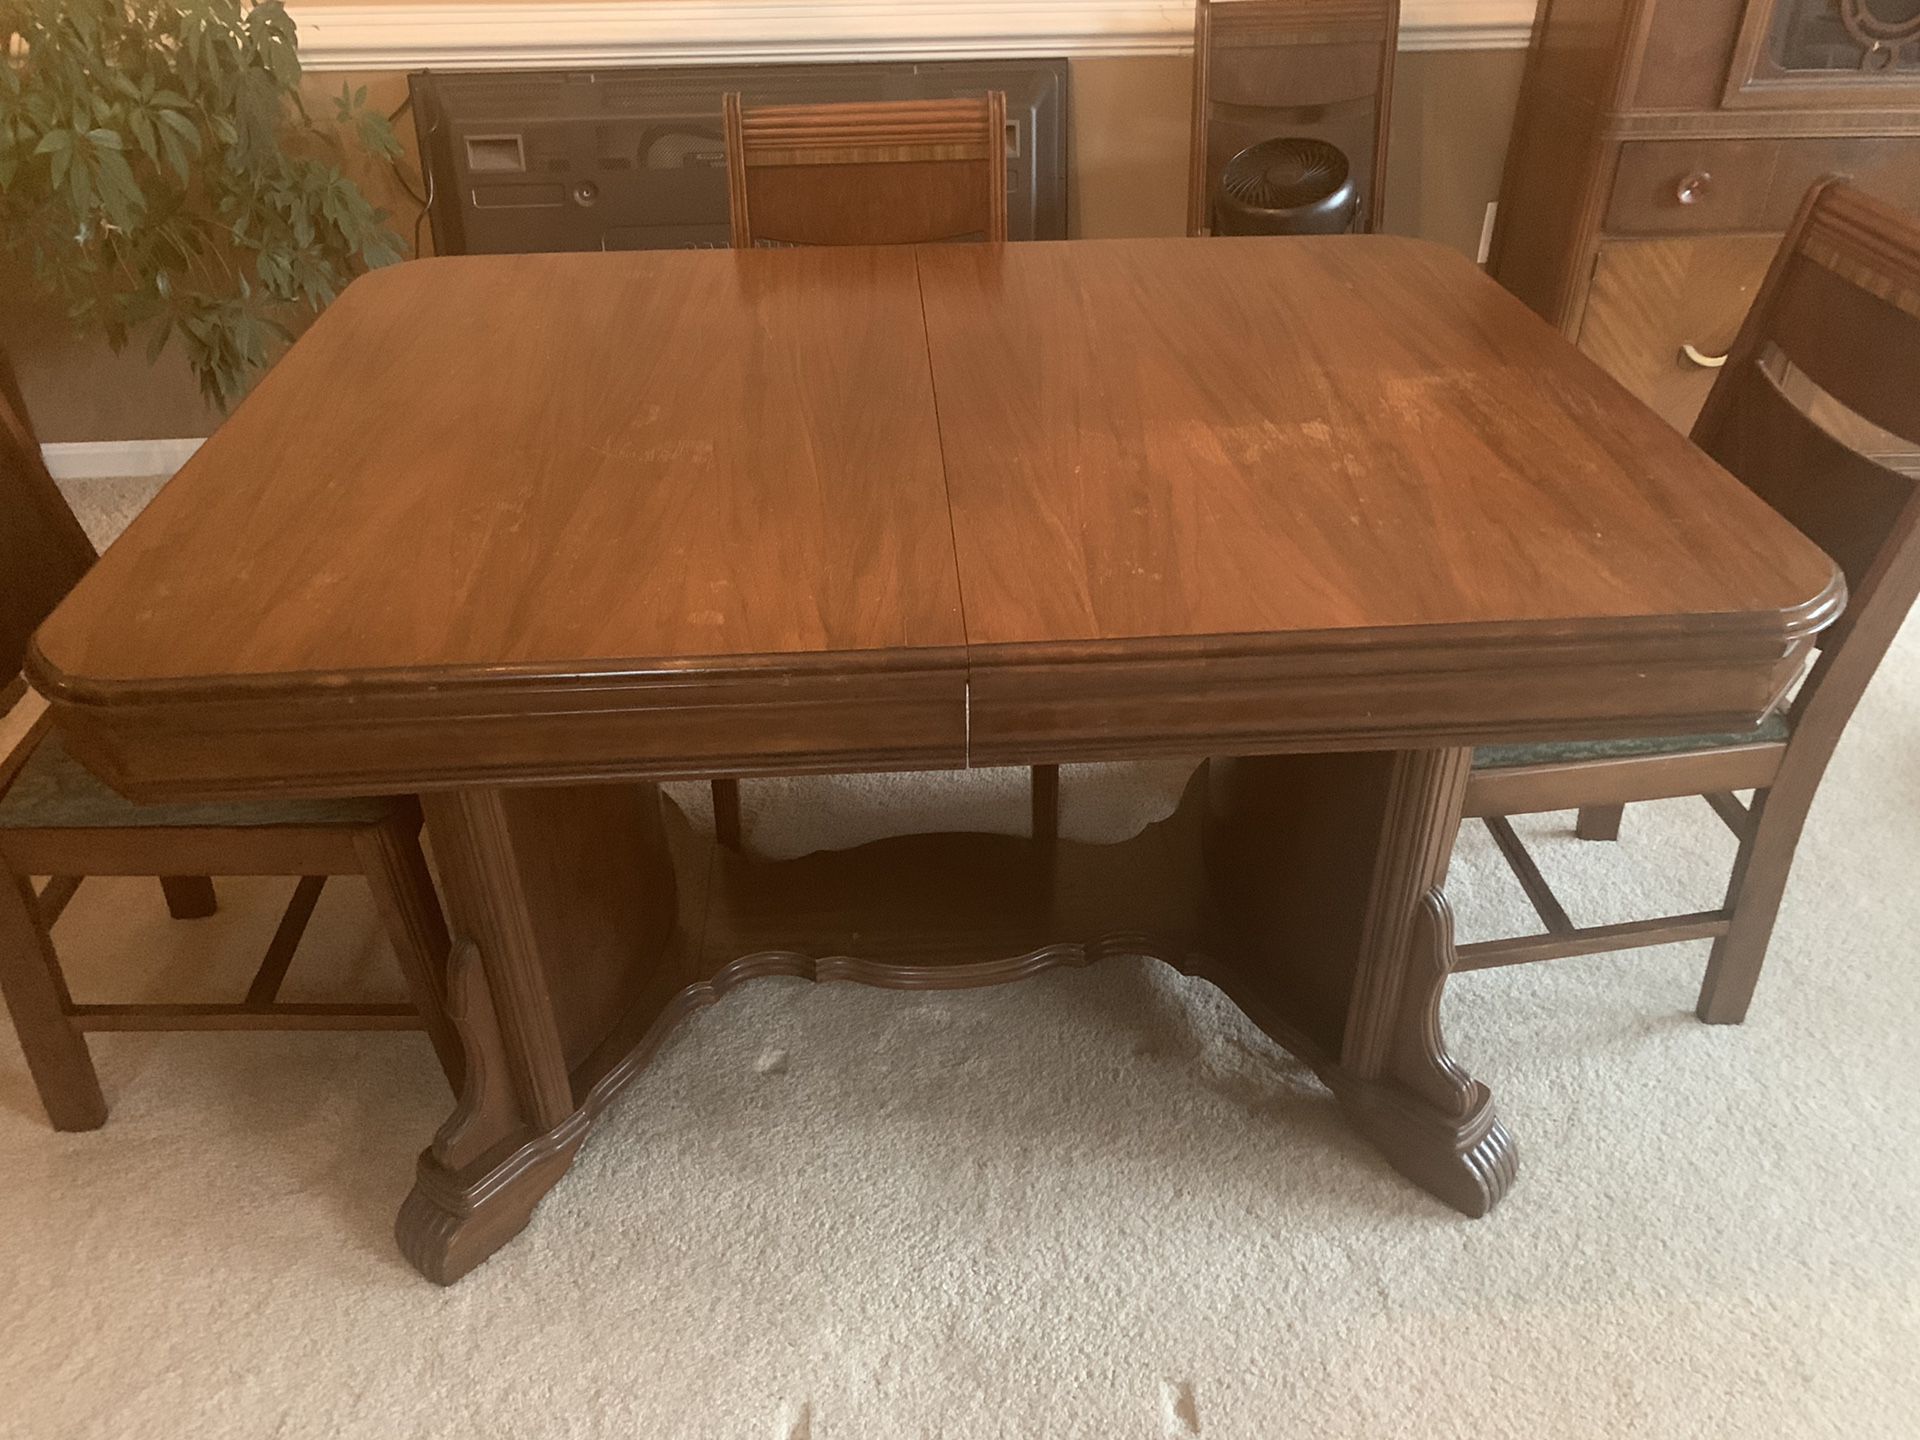 FREE! Table, six chairs, sideboard